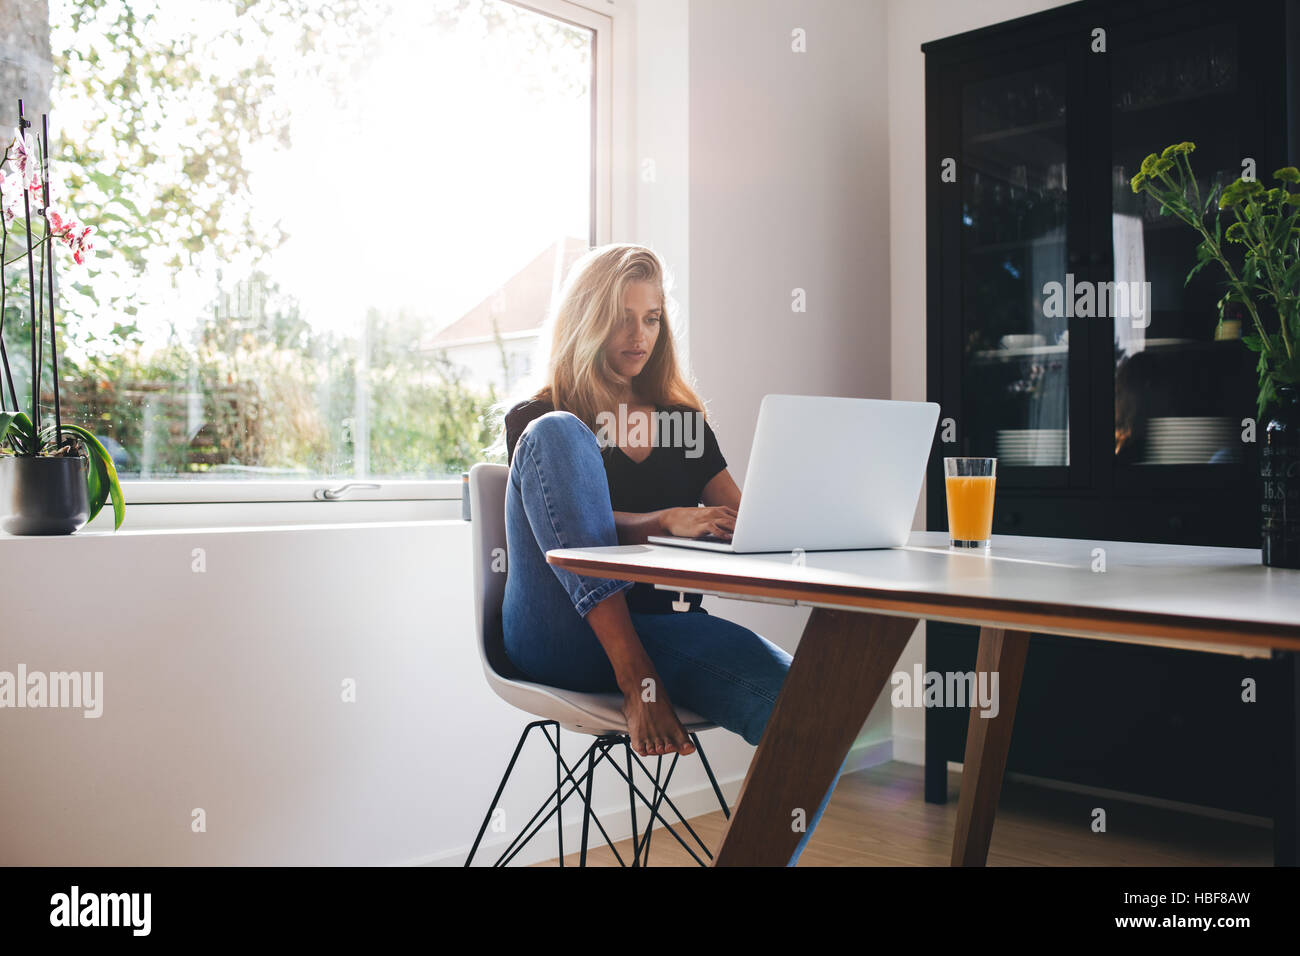 Young woman sitting in kitchen and working on laptop in morning. Female using laptop dining table with fruit juice. Stock Photo